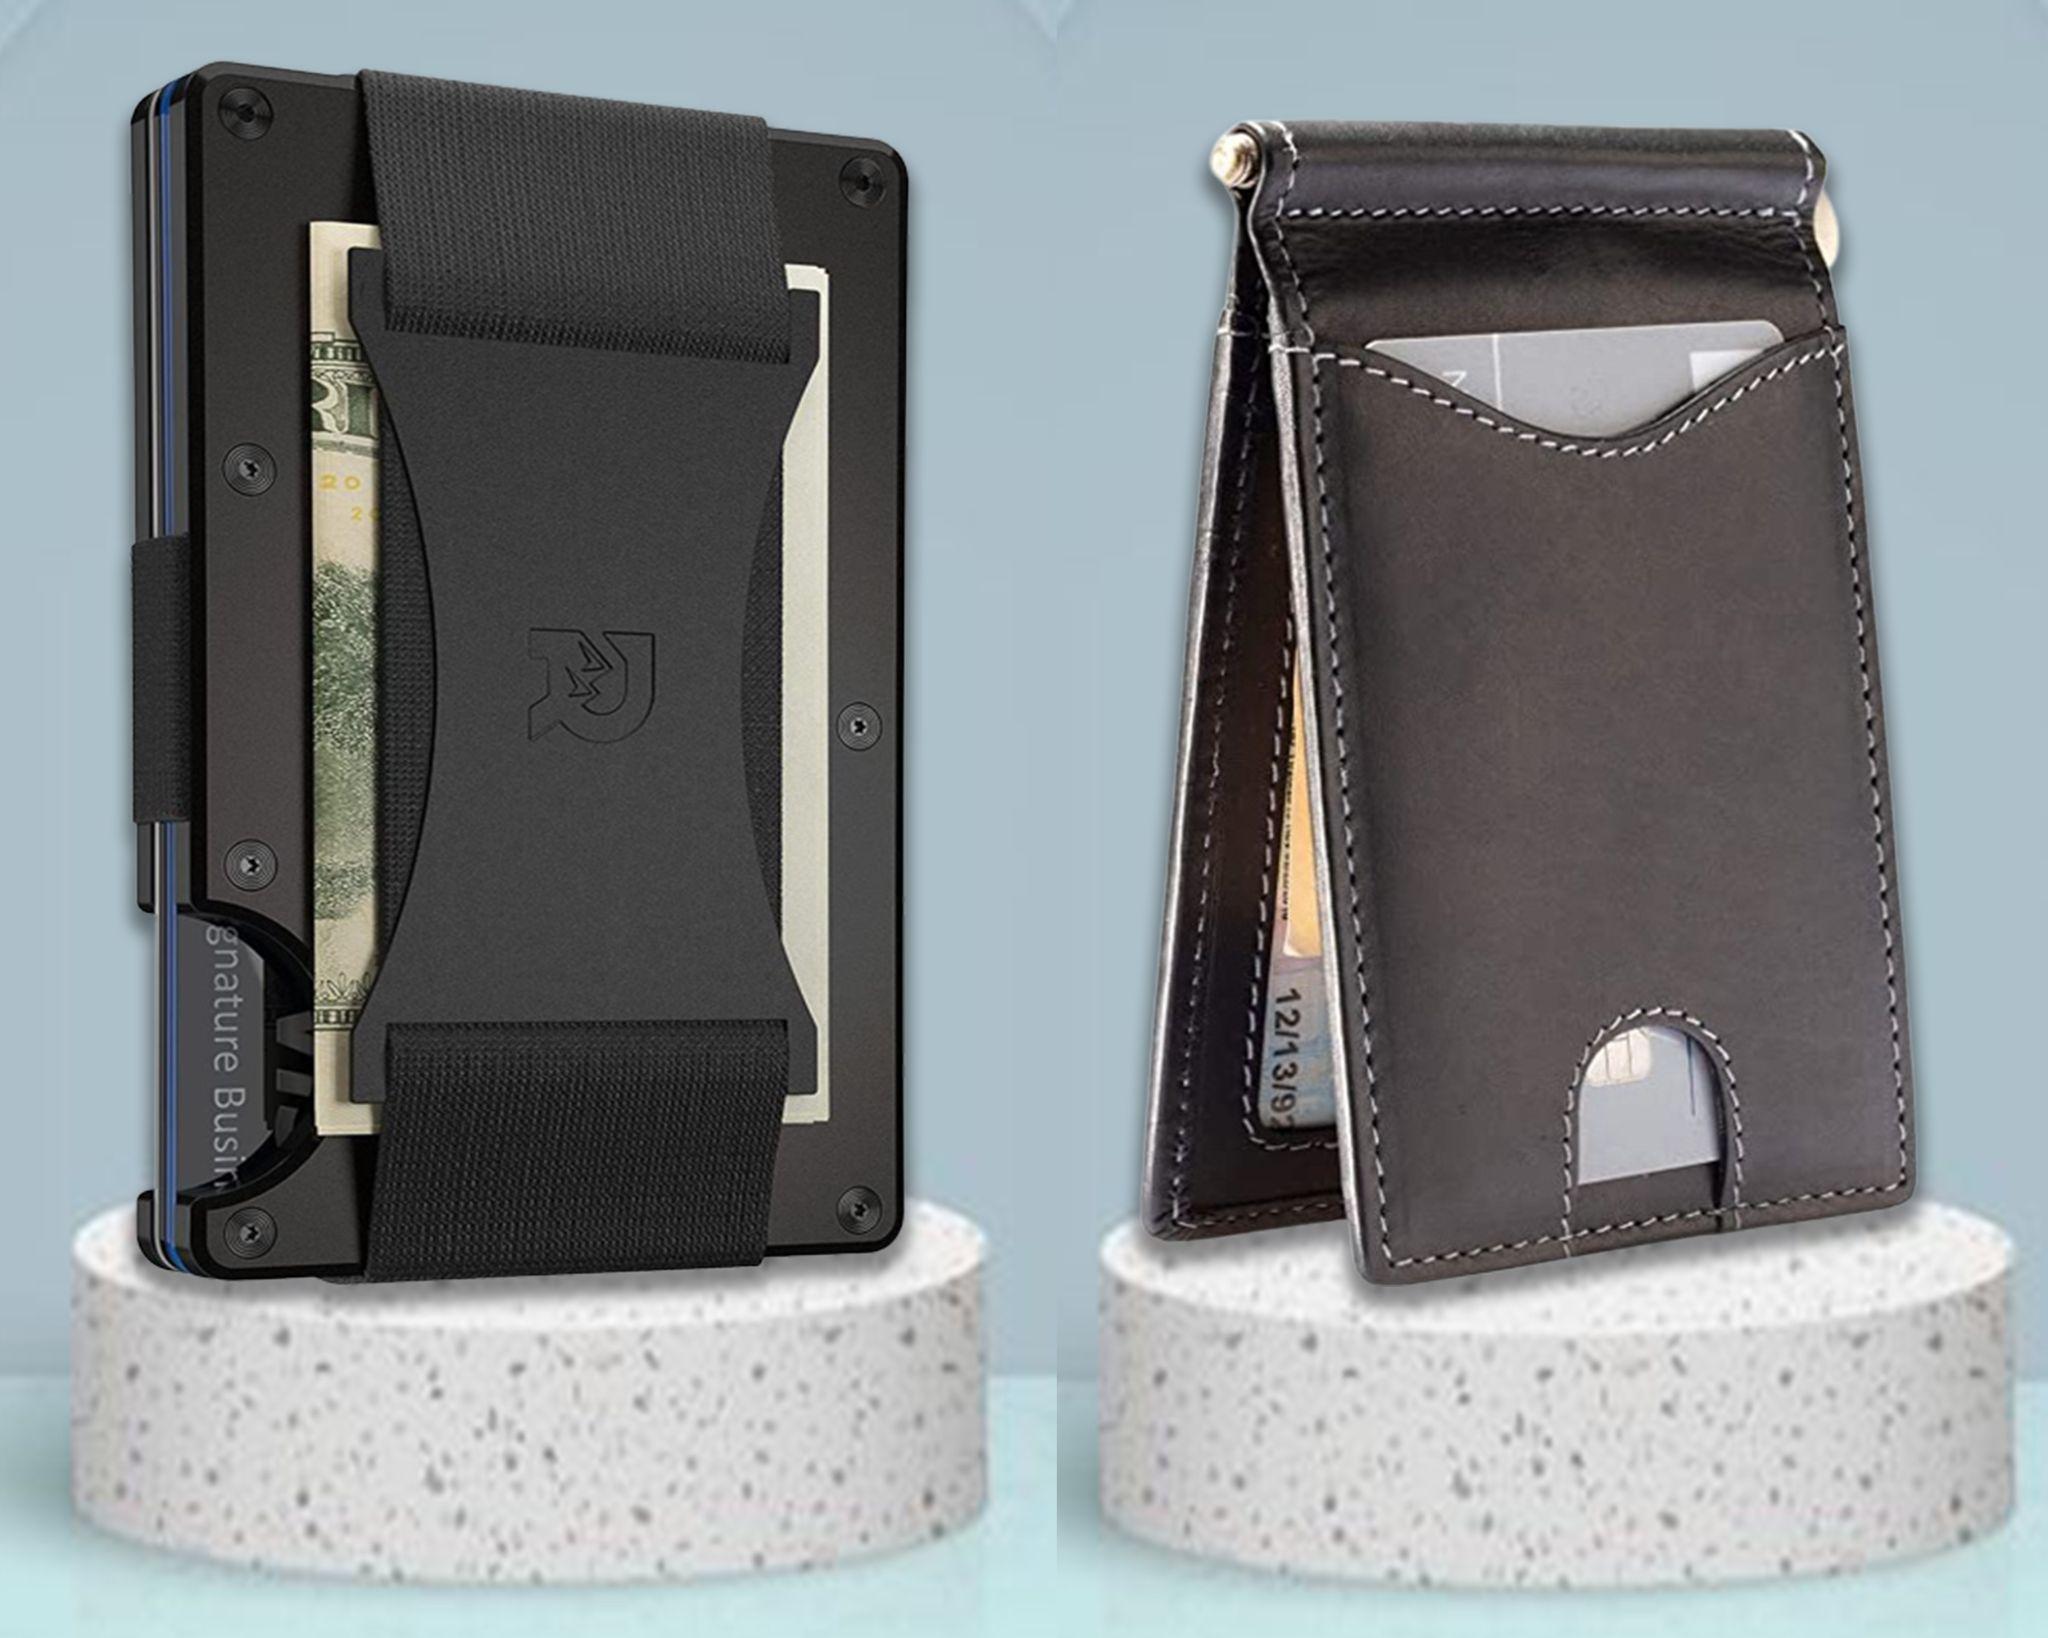 A SELECTION OF 2022'S BEST MINIMALIST WALLETS